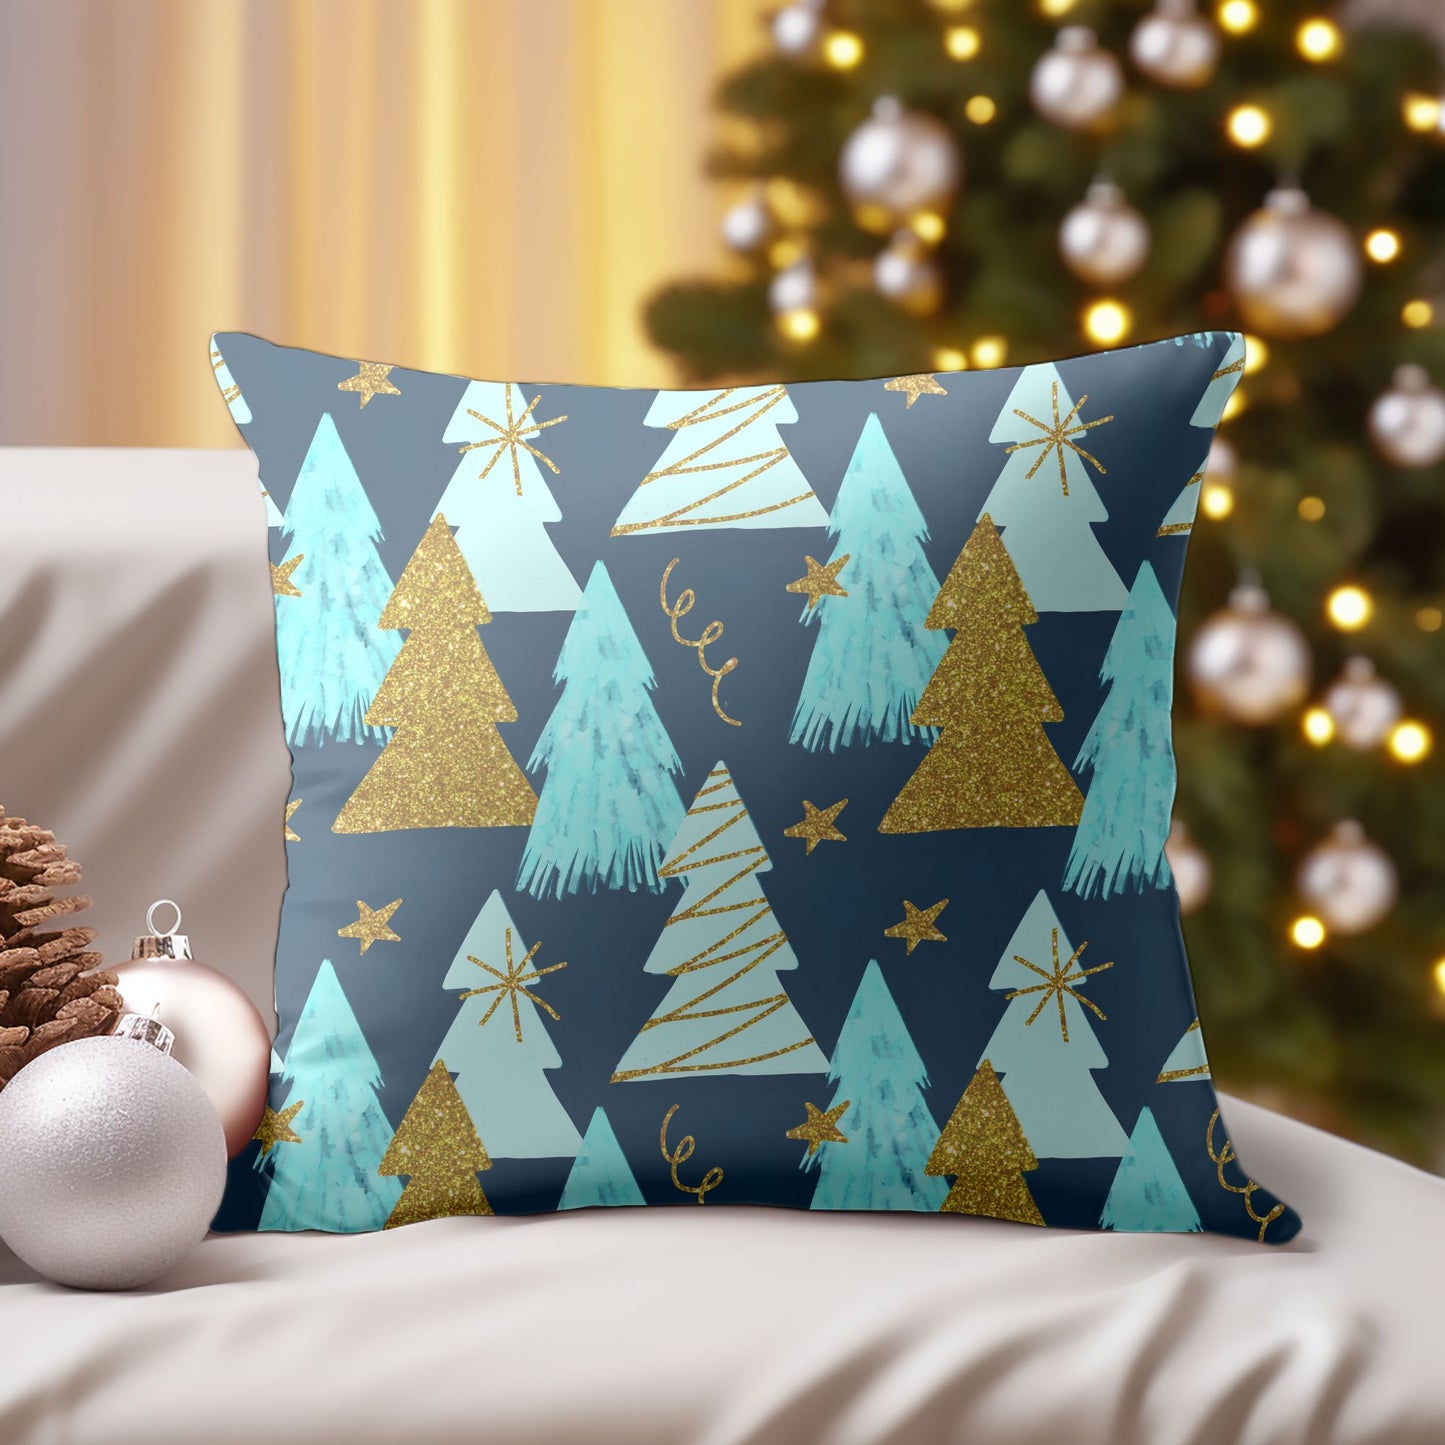 High-Quality Pillow Cover with Christmas Tree Art